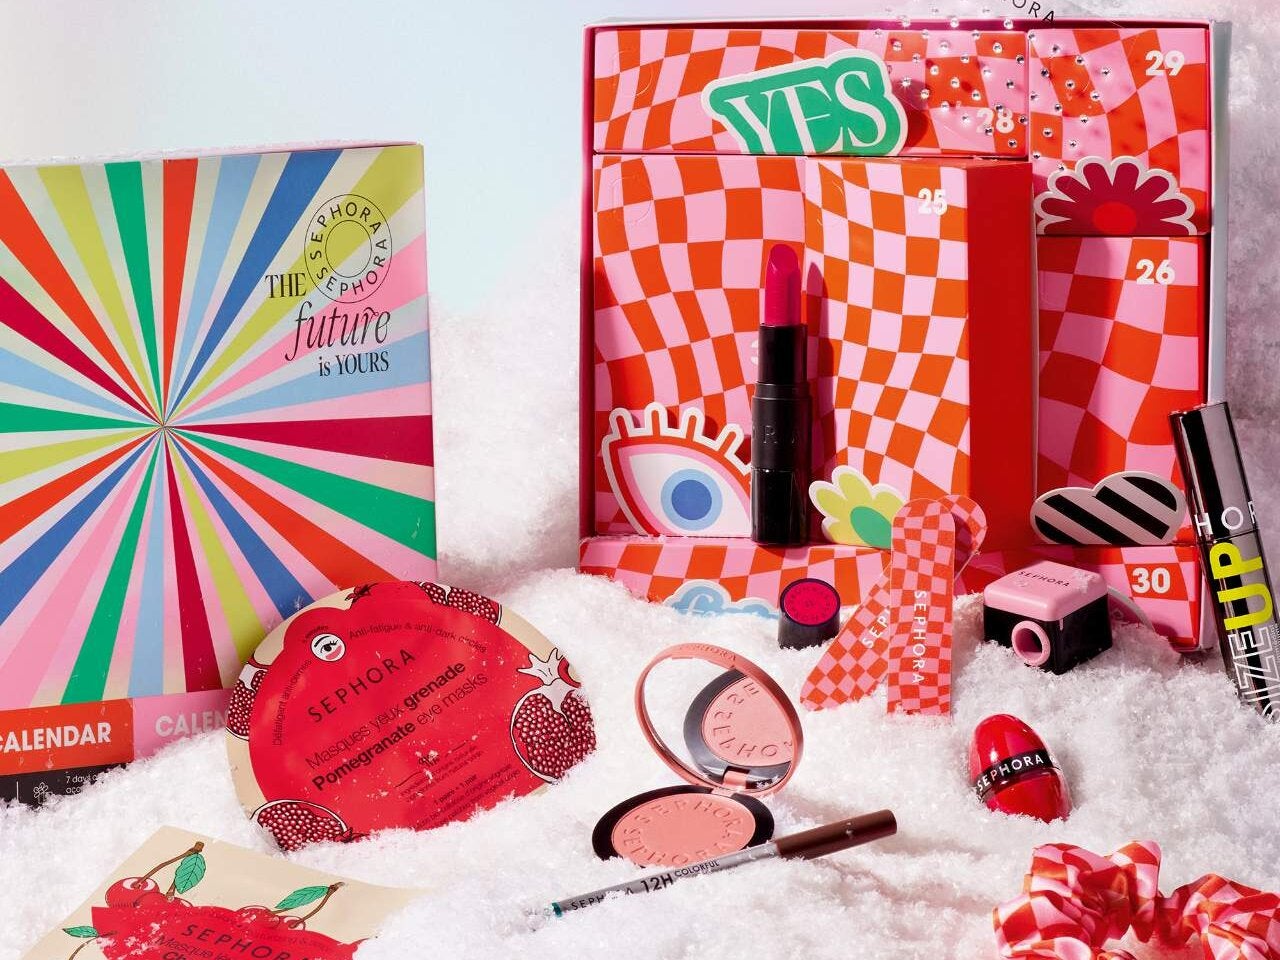 Jumpstart Your Holiday Shopping With These Sephora Gift Sets